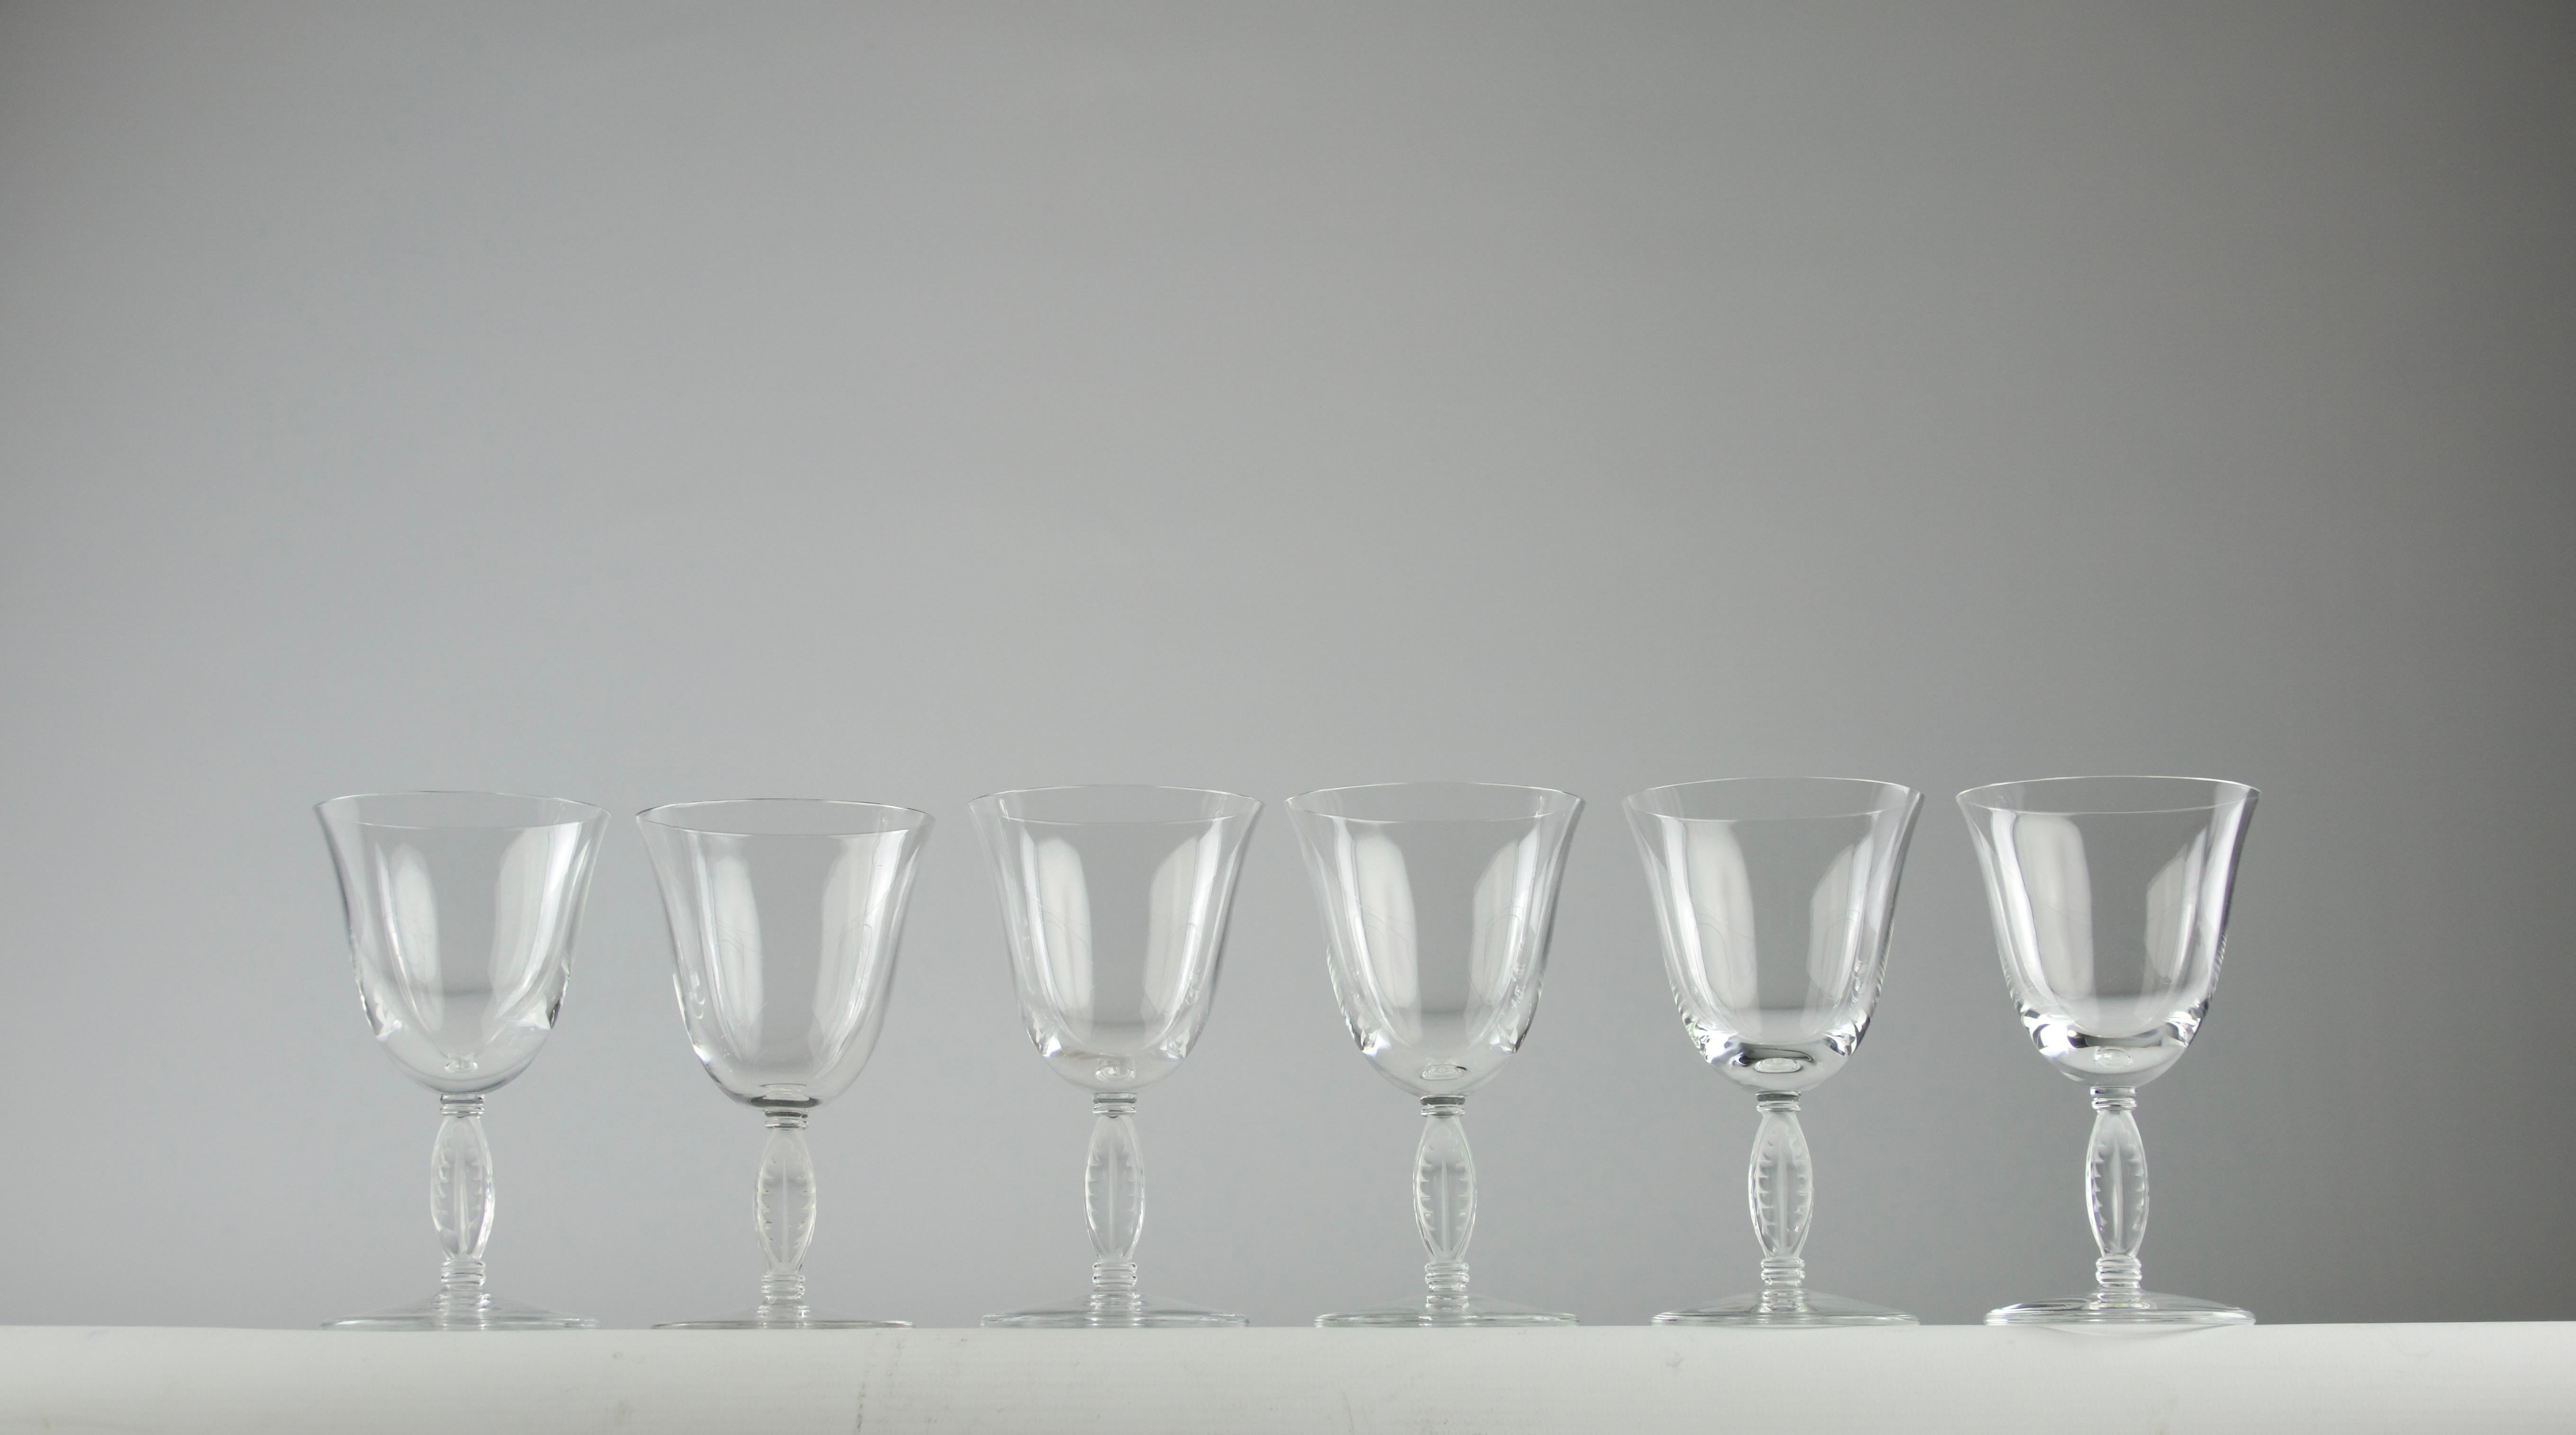 Beautiful Lalique Fontainebleau set of six white wine glasses. Other wine glasses from the same collection are available in the shop.

In very good condition.

Dimensions in cm ( H x D ) : 12.4 x 7

Secure shipping.

First designed by Rene Lalique